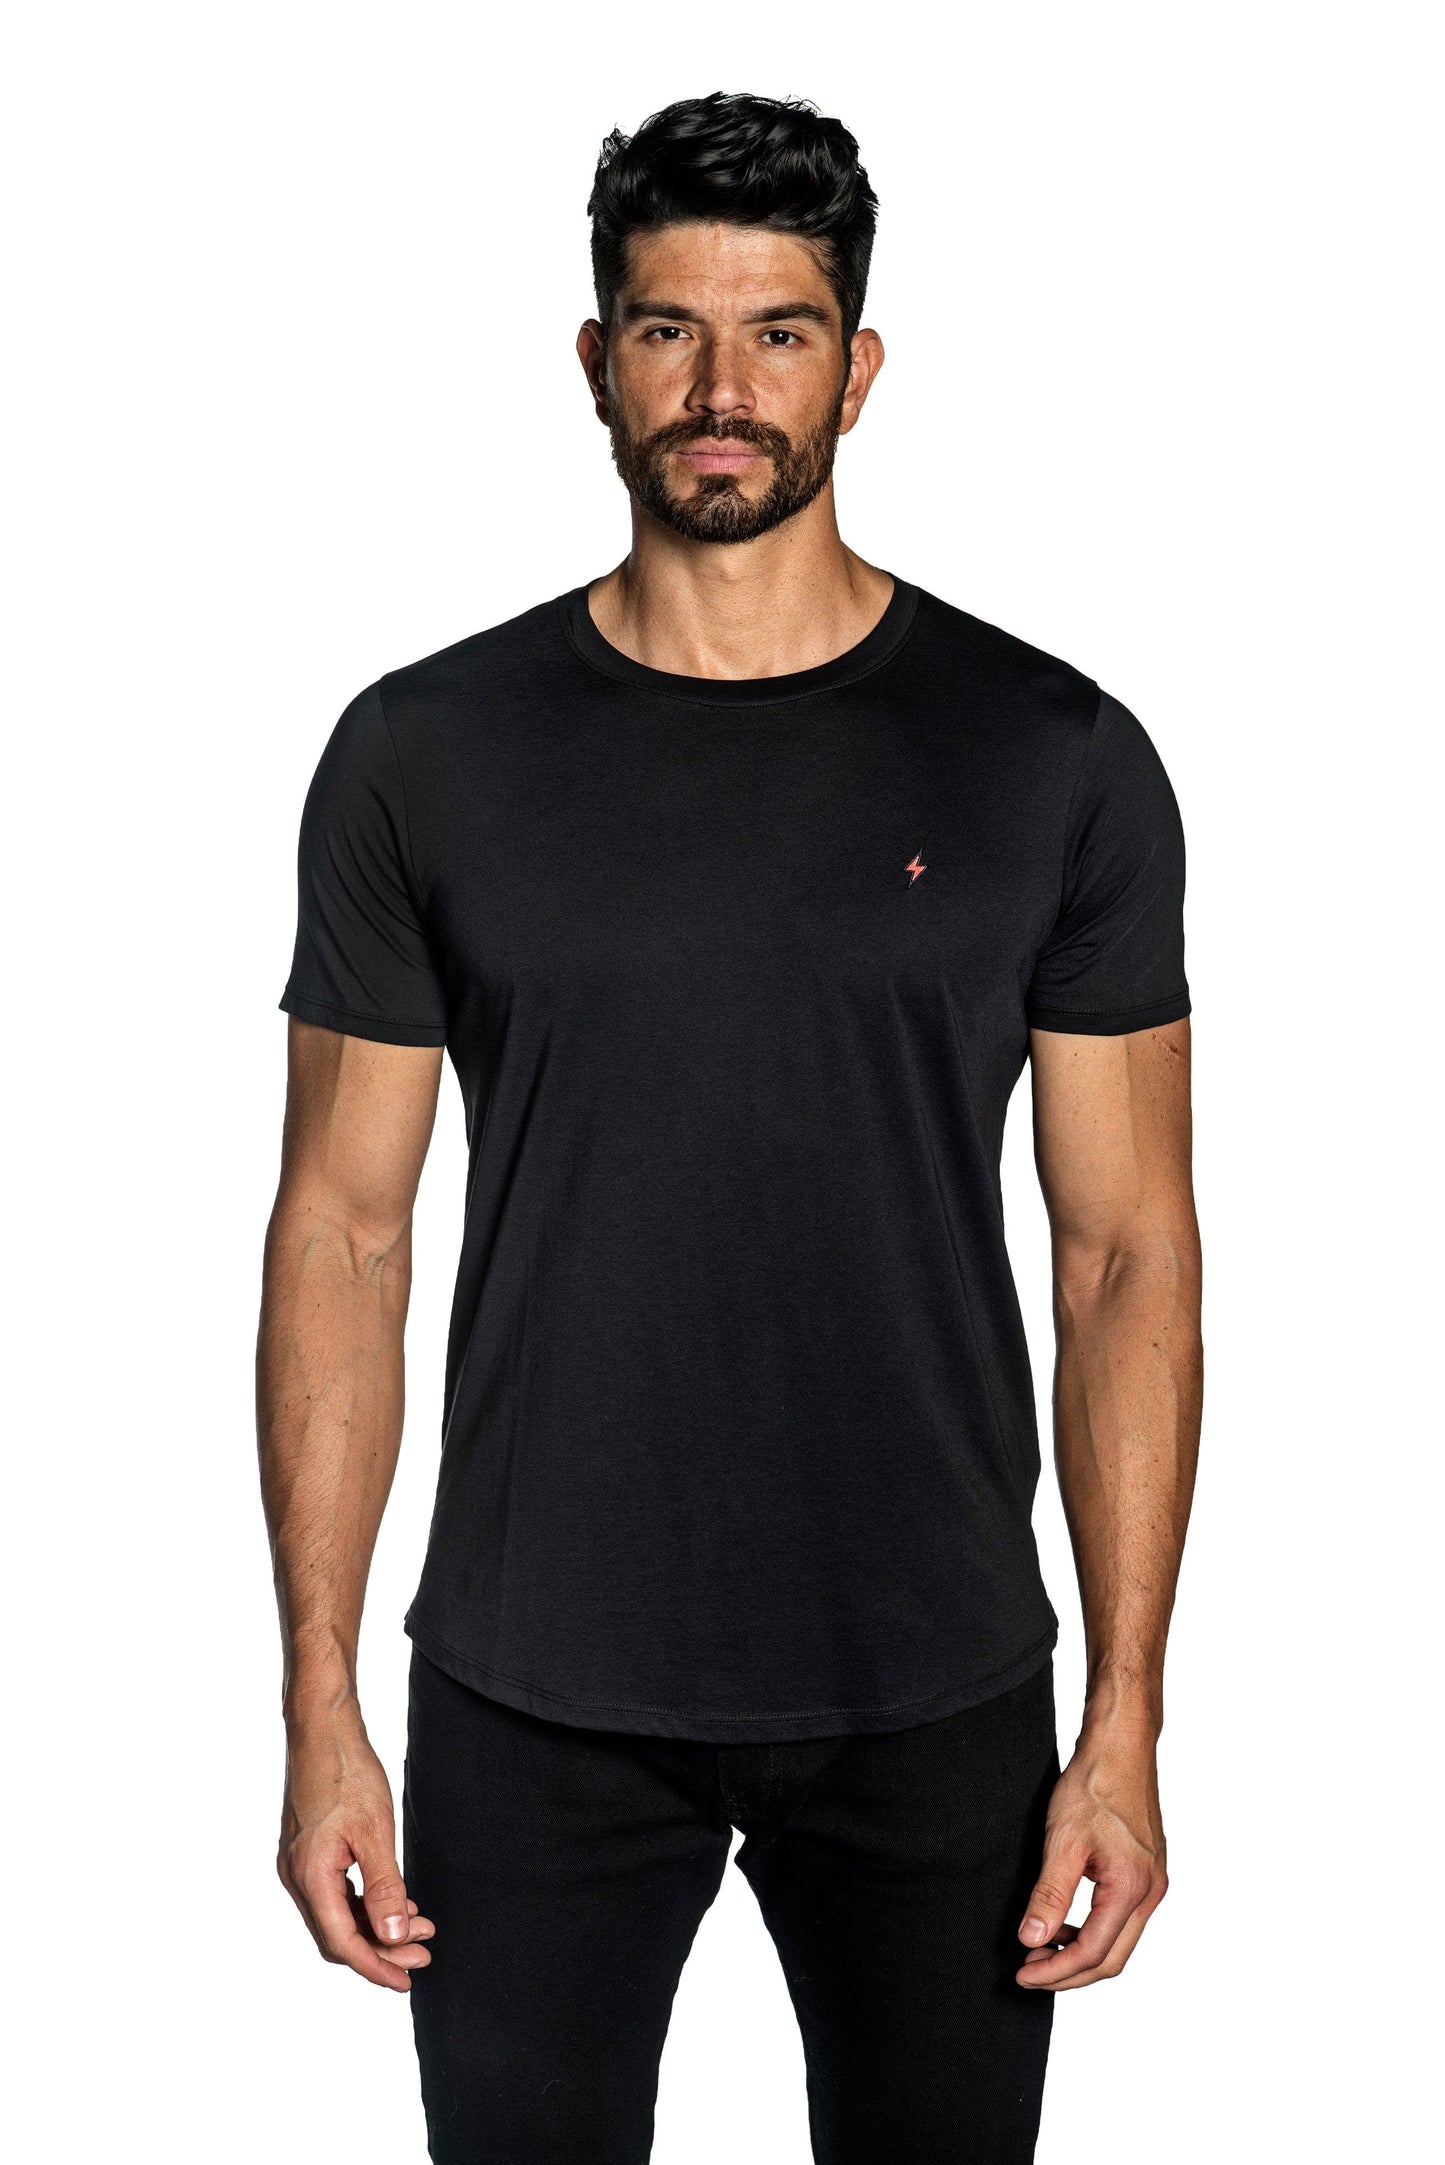 Black Mens T-Shirt With Lightning Embroidery TEE-39.